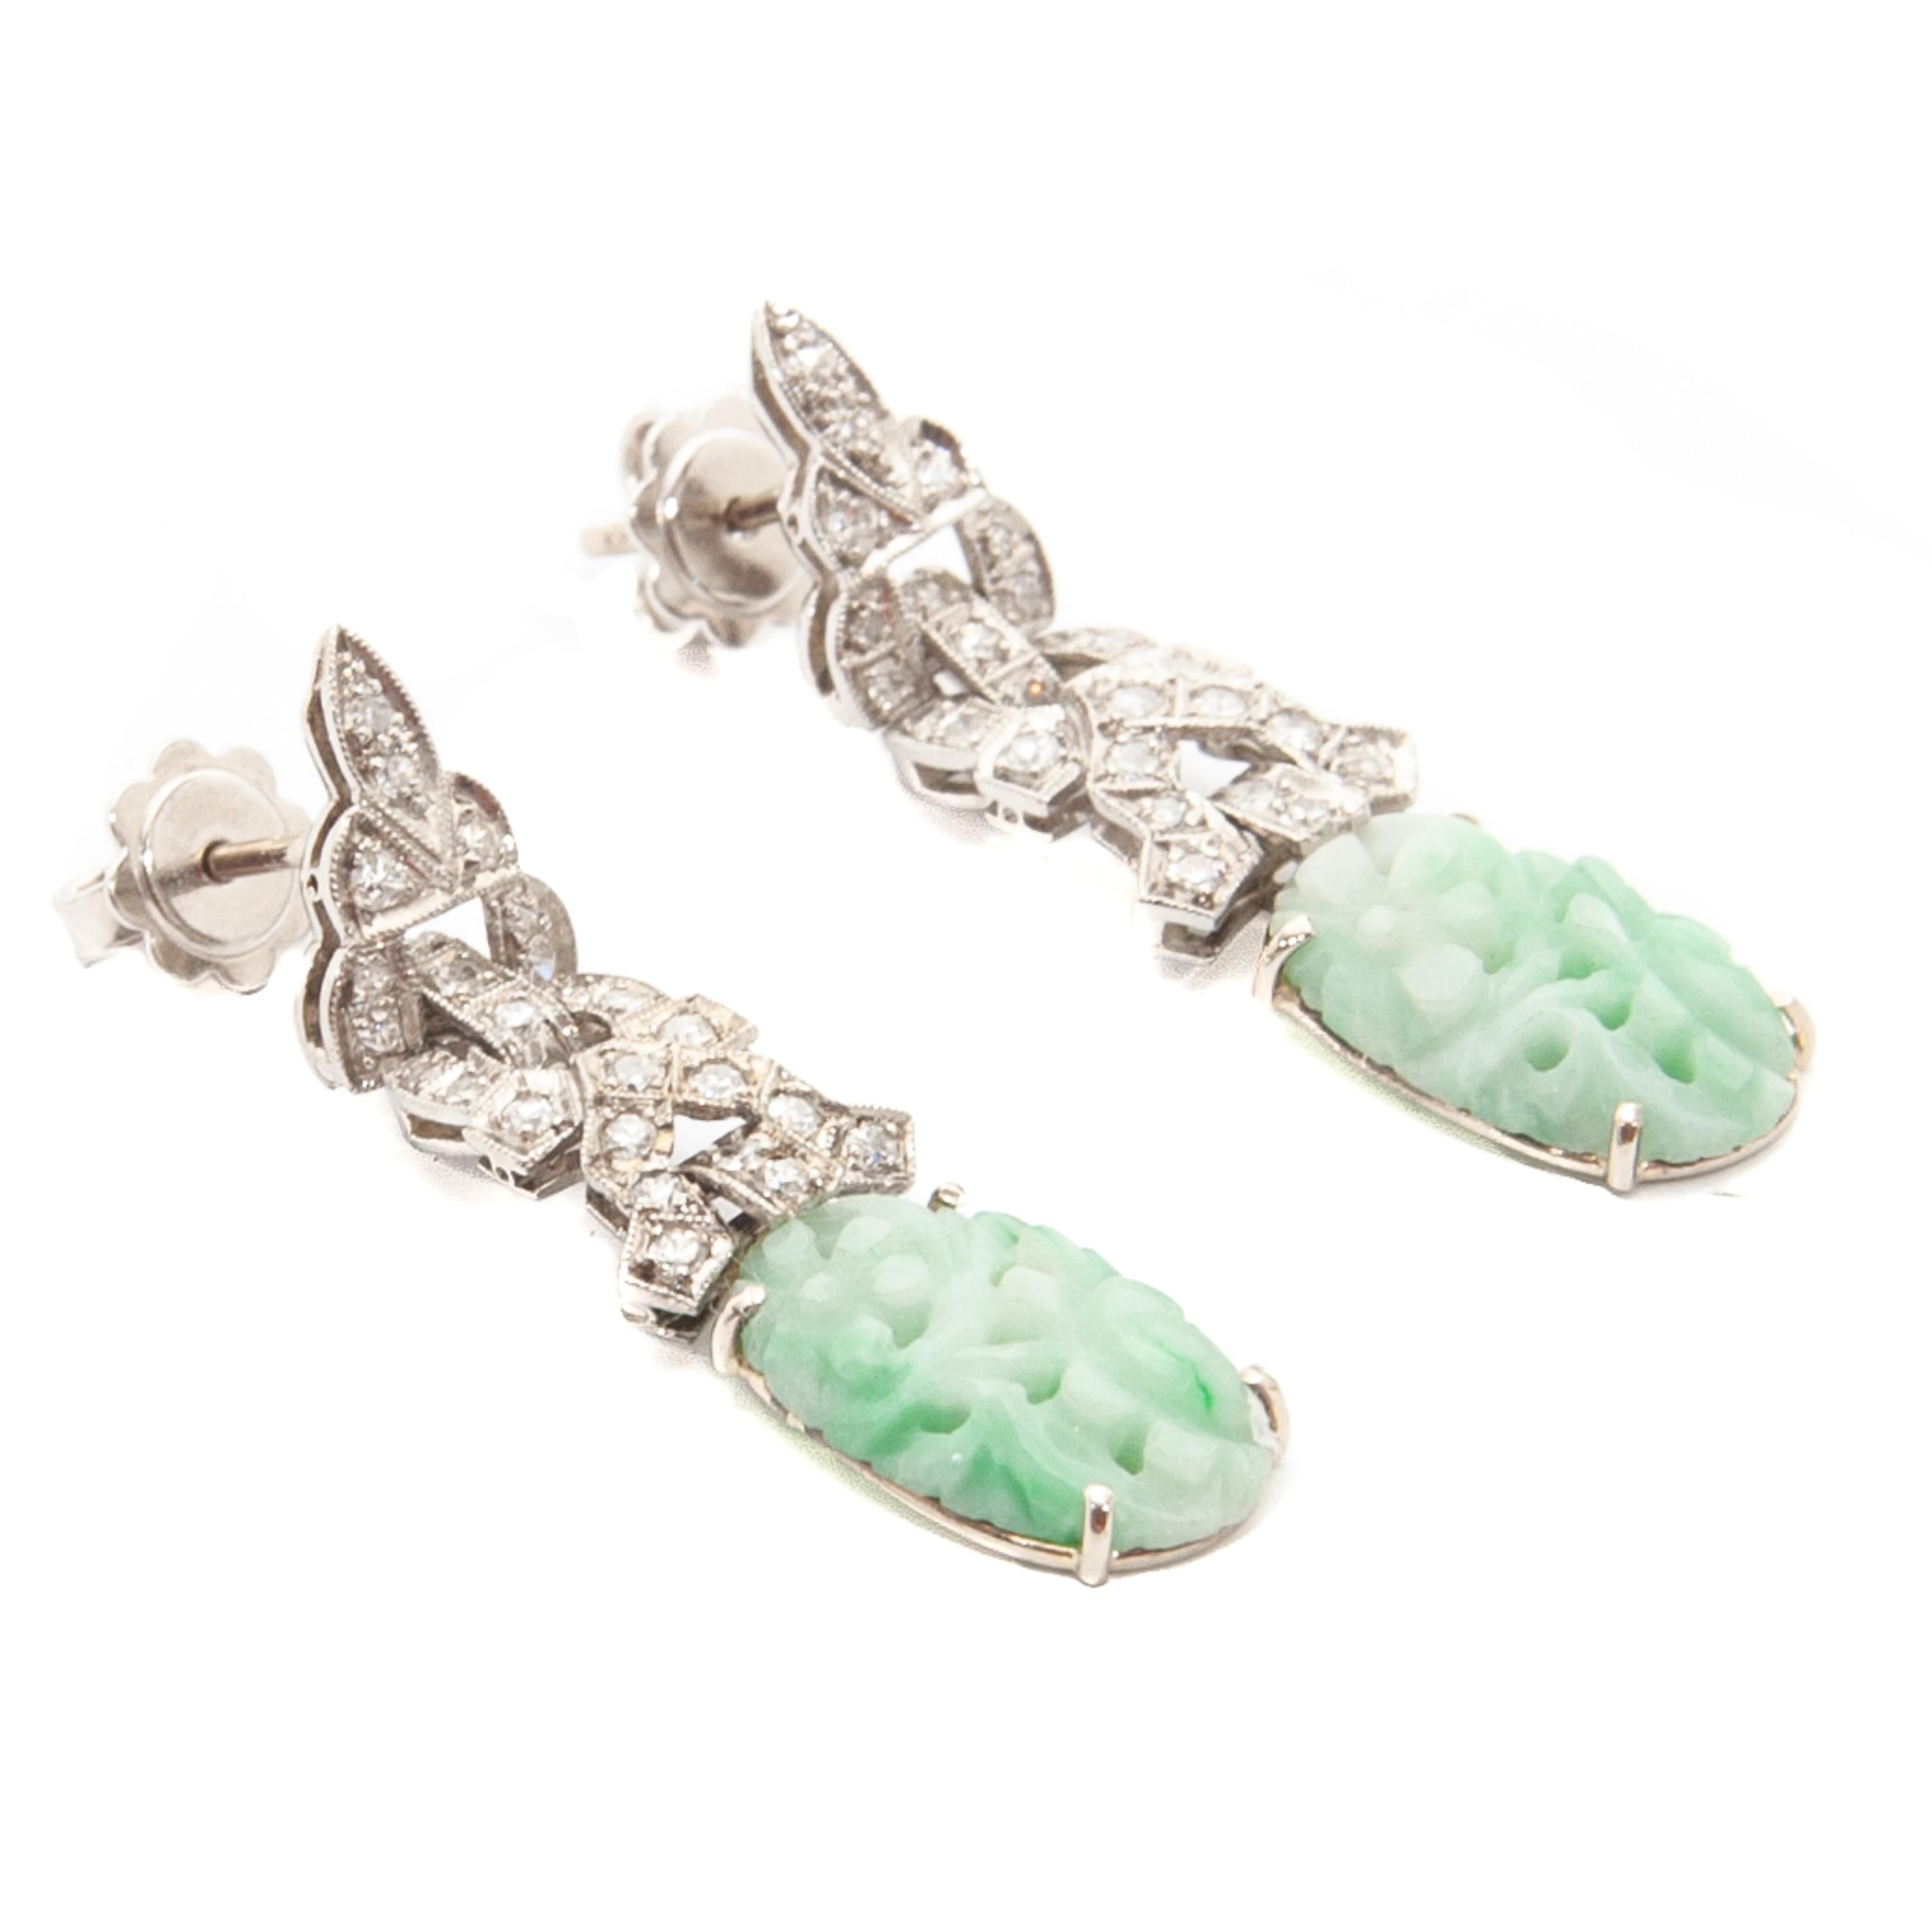 Magnificent Art Deco 1920s 14 karat white gold drop earrings, with each twenty-six octagonal cut diamonds. These earrings have gorgeous and delicate oval-shaped and carved jade. The diamonds are approximately 0.50 in carat, content 0.585. 

These